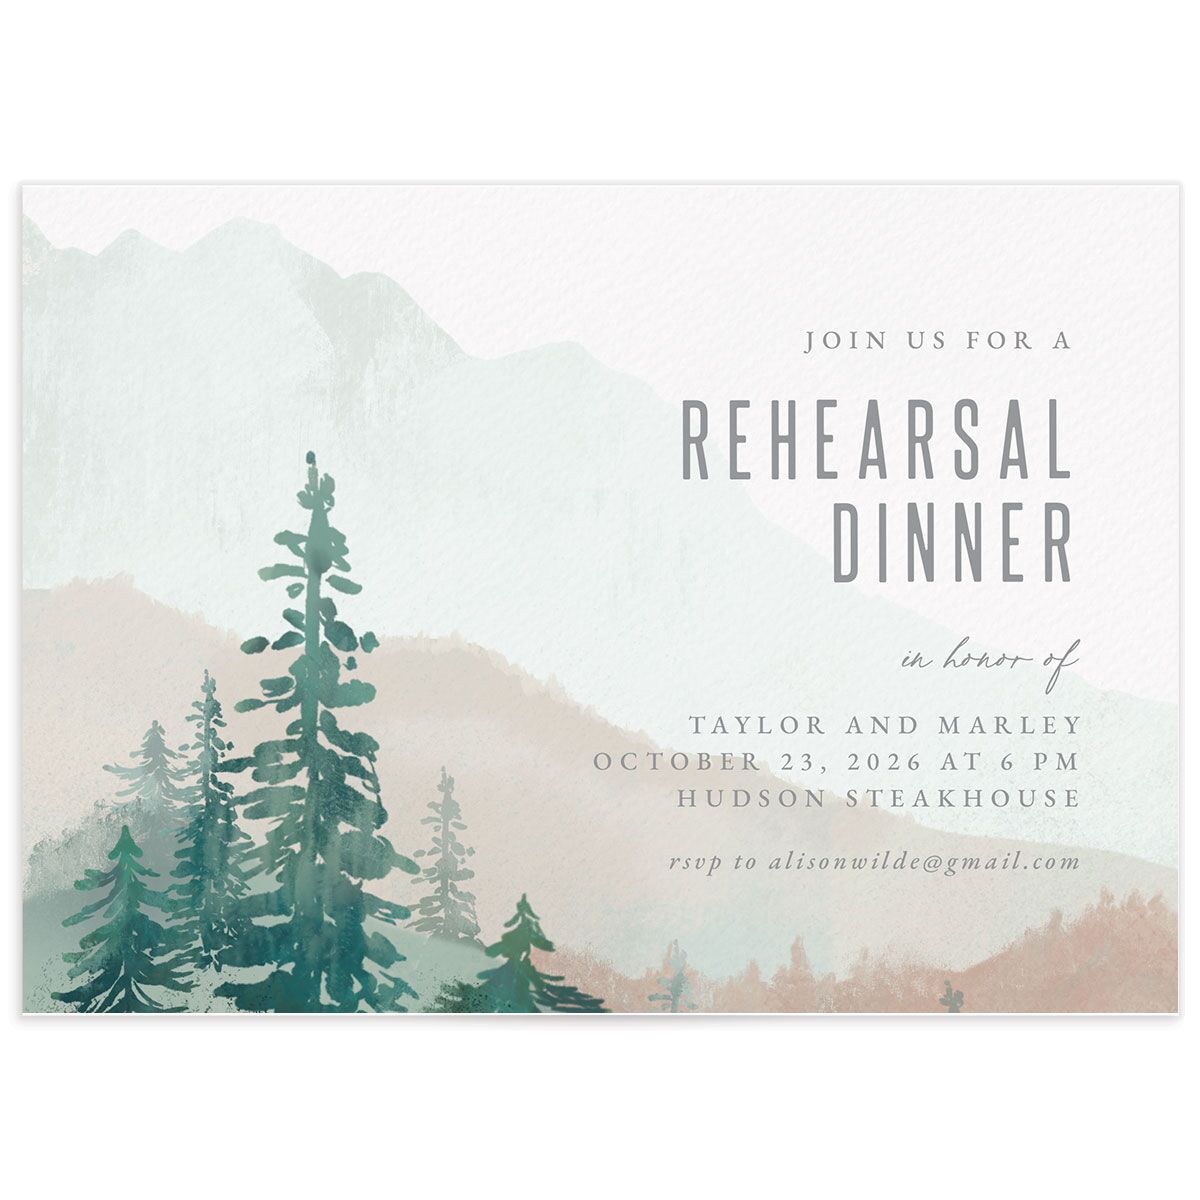 Painted Mountains Rehearsal Dinner Invitations